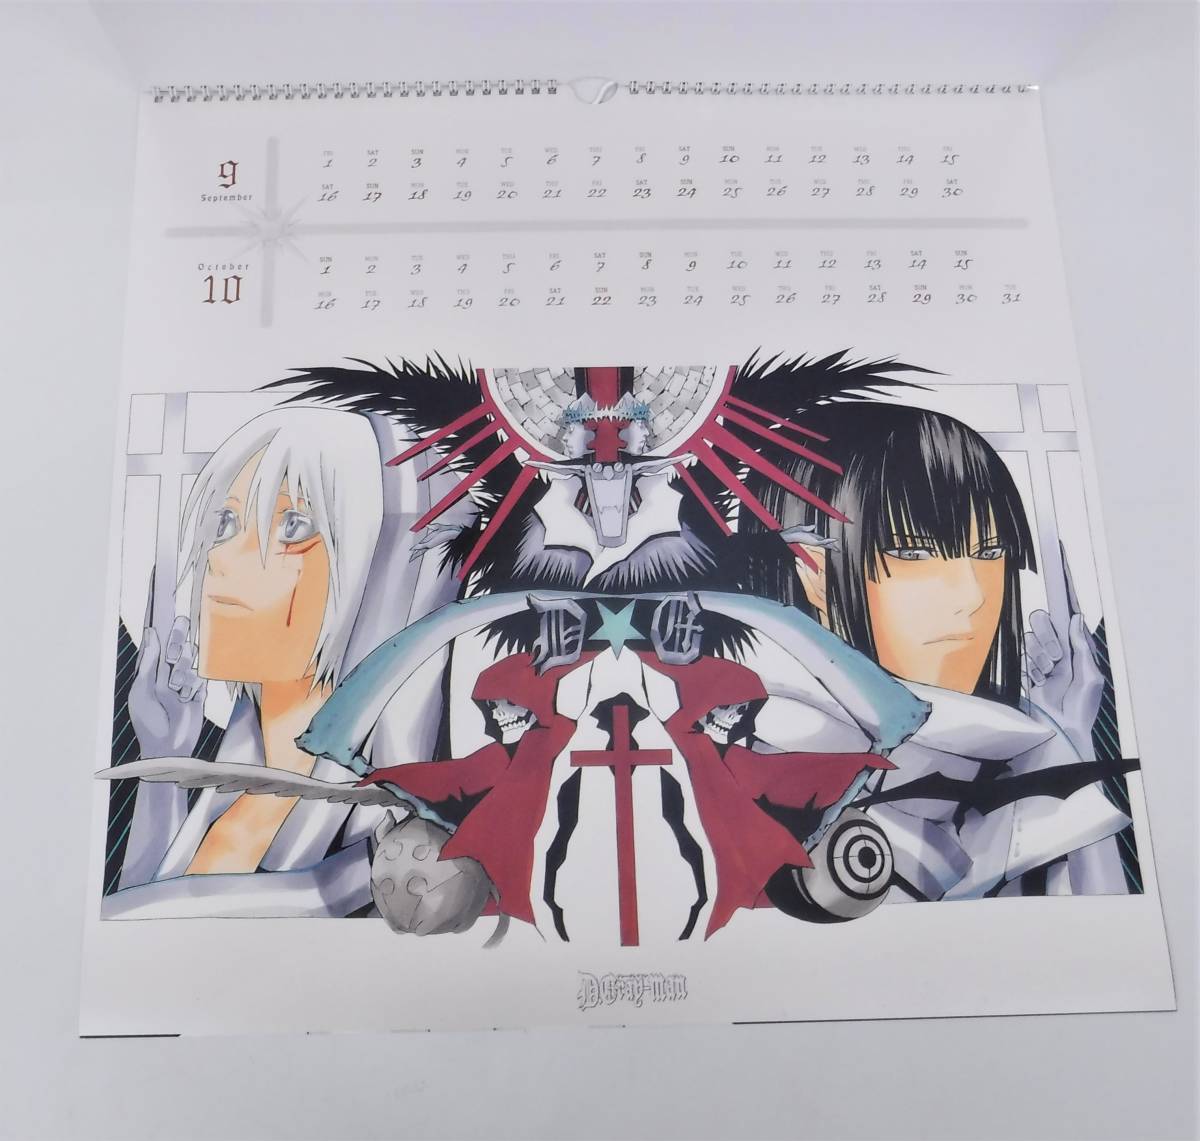 # new goods unopened # comics calendar 2006# D.Gray-man# star . katsura tree # anonymity delivery | Yupack postage included 